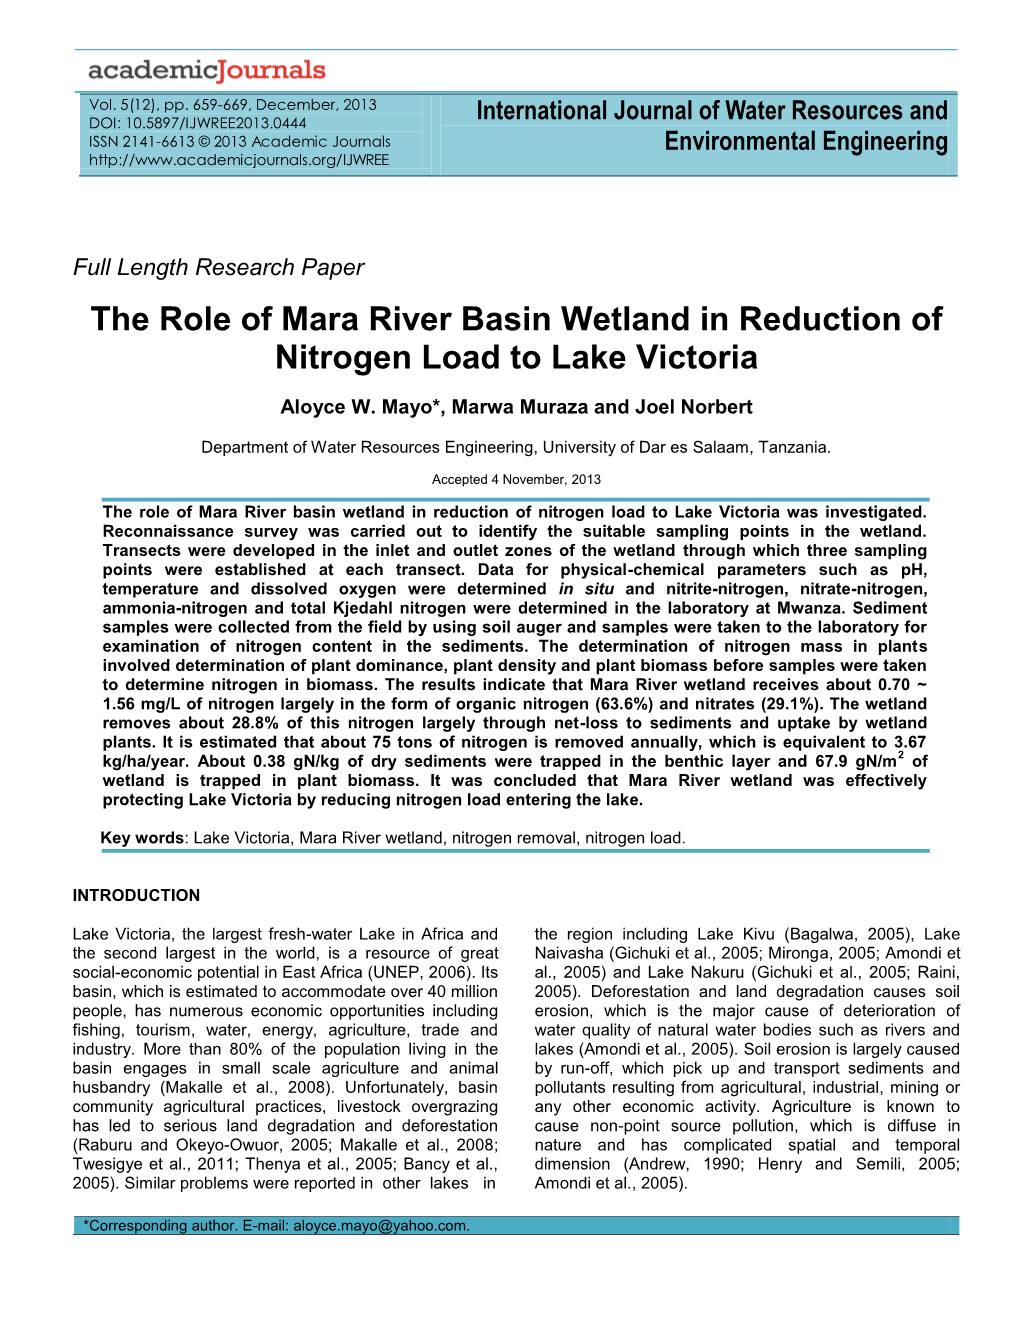 The Role of Mara River Basin Wetland in Reduction of Nitrogen Load to Lake Victoria